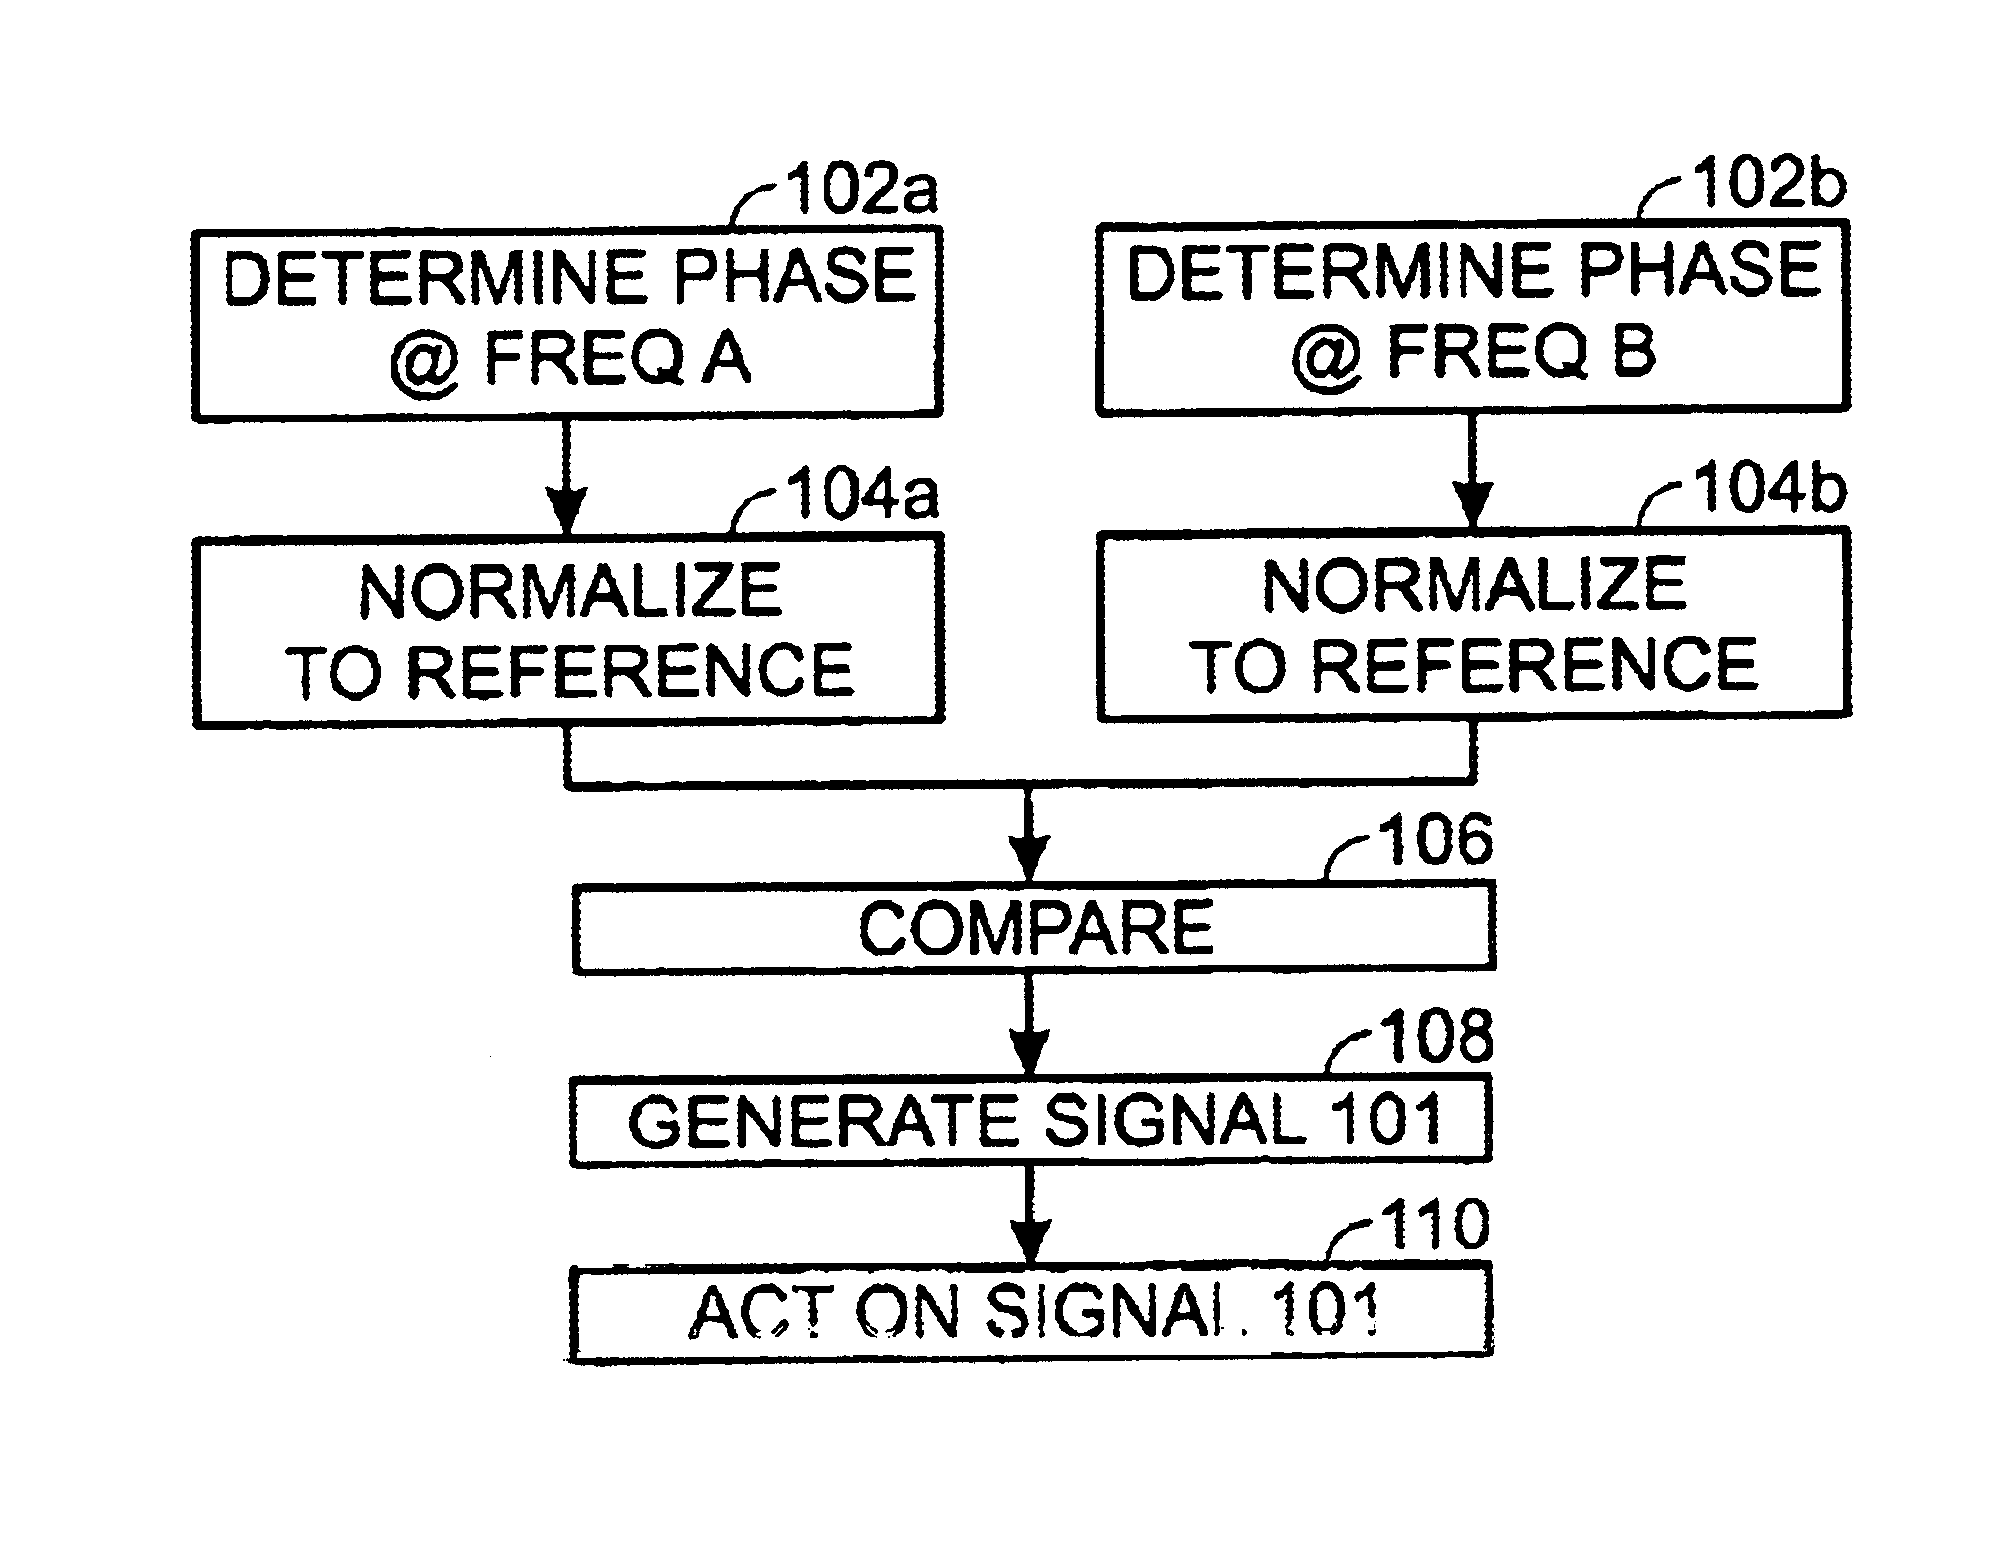 Method and apparatus for distinguishing metal objects employing multiple frequency interrogation